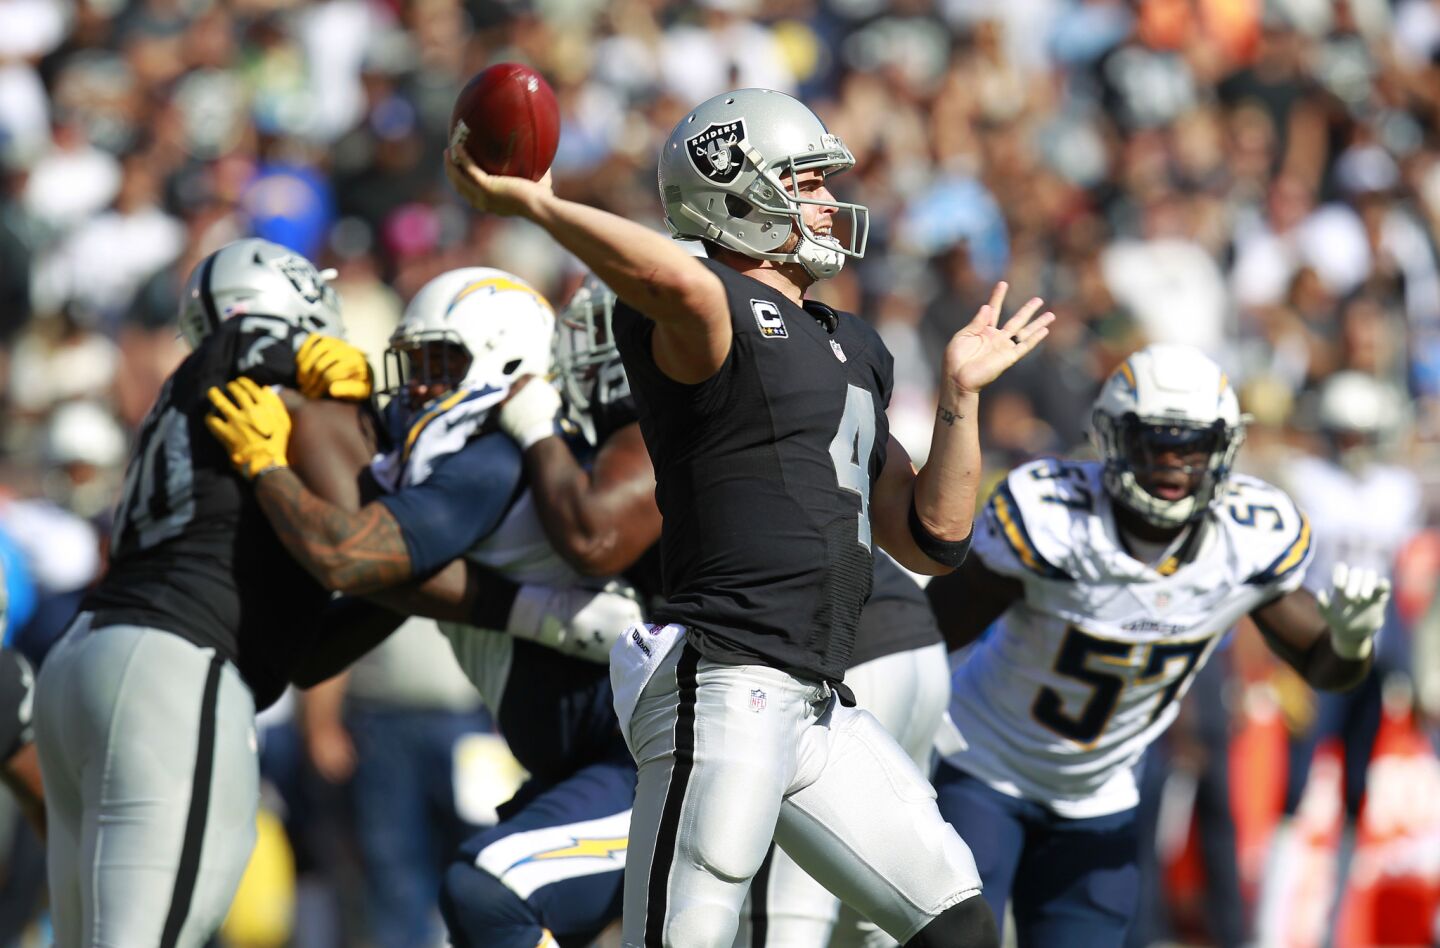 Oakland Raiders quarterback Derek Carr throws a pass agains the Chargers in Oakland on Oct. 9, 2016. (Photo by K.C. Alfred/The San Diego Union-Tribune)